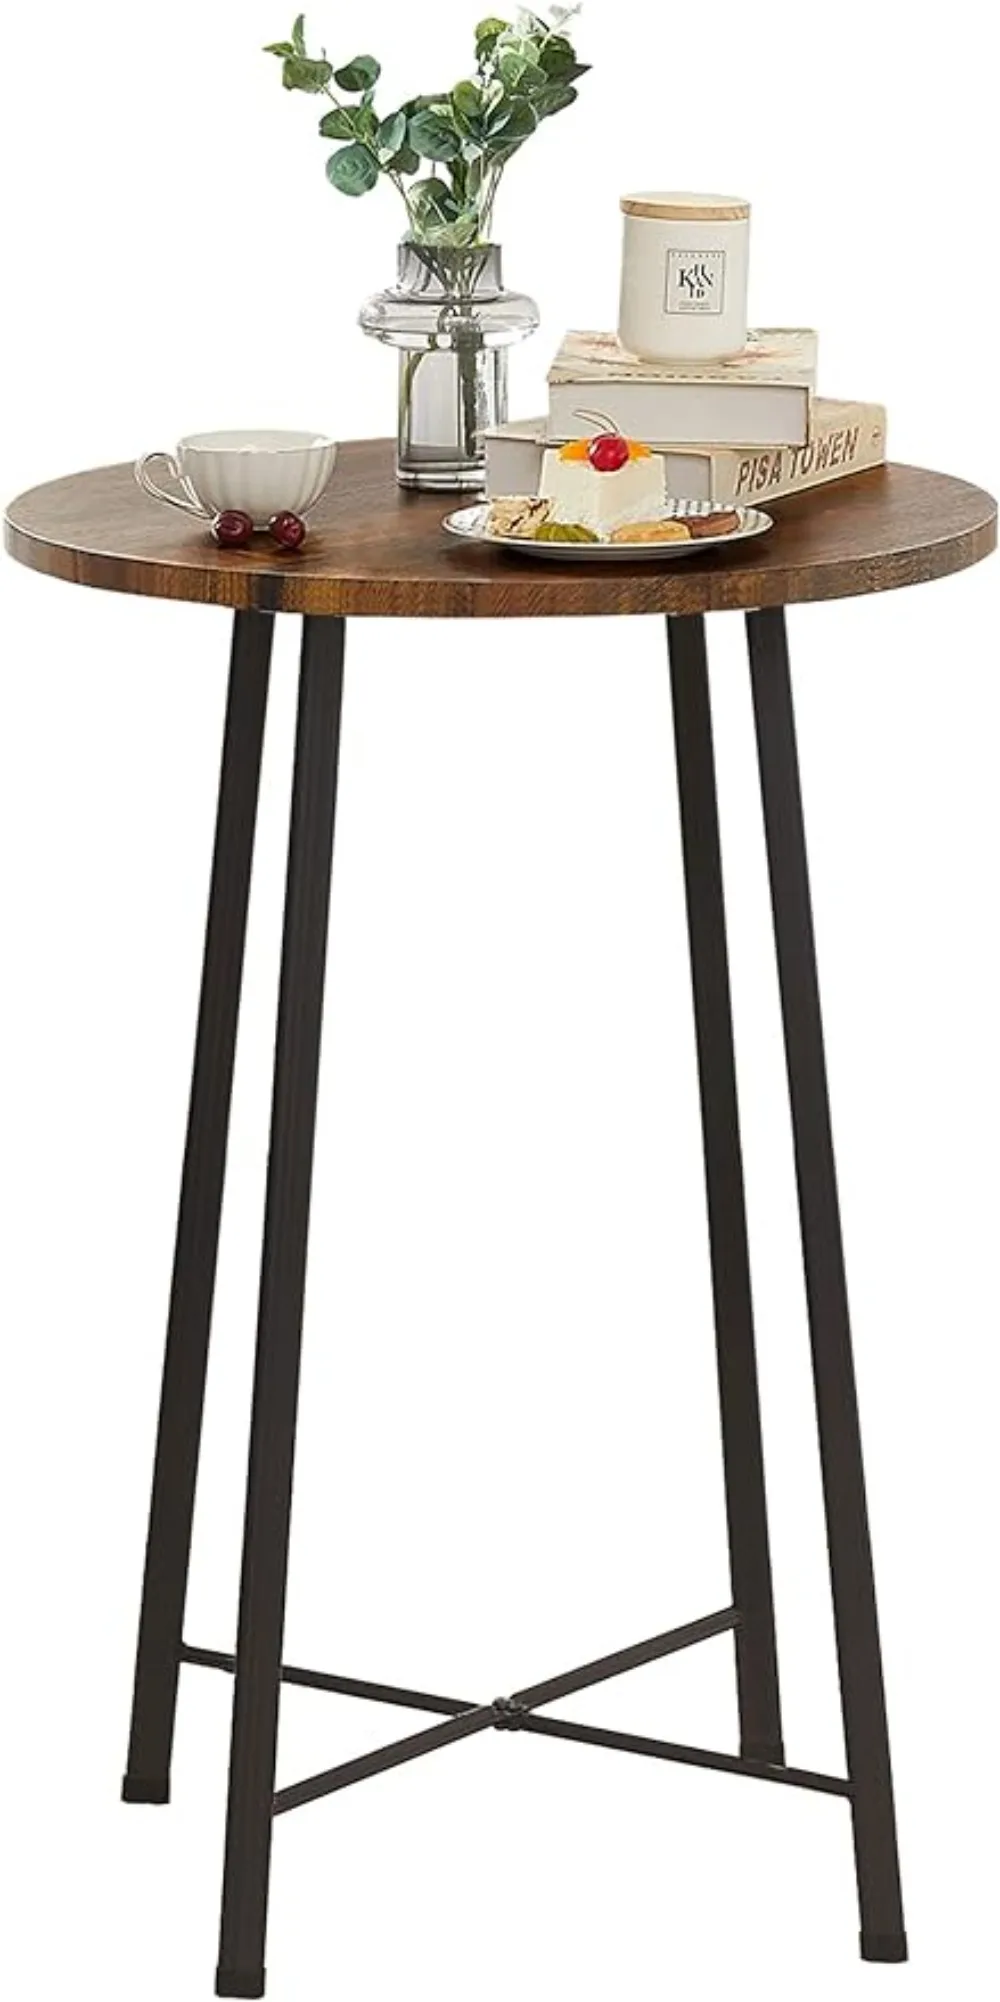 

Round Bar Table, Classic Bistro Pub Furniture,Small Spaces Saving for Dining Room Breakfast,Coffee, Easy to Assemble, Brown